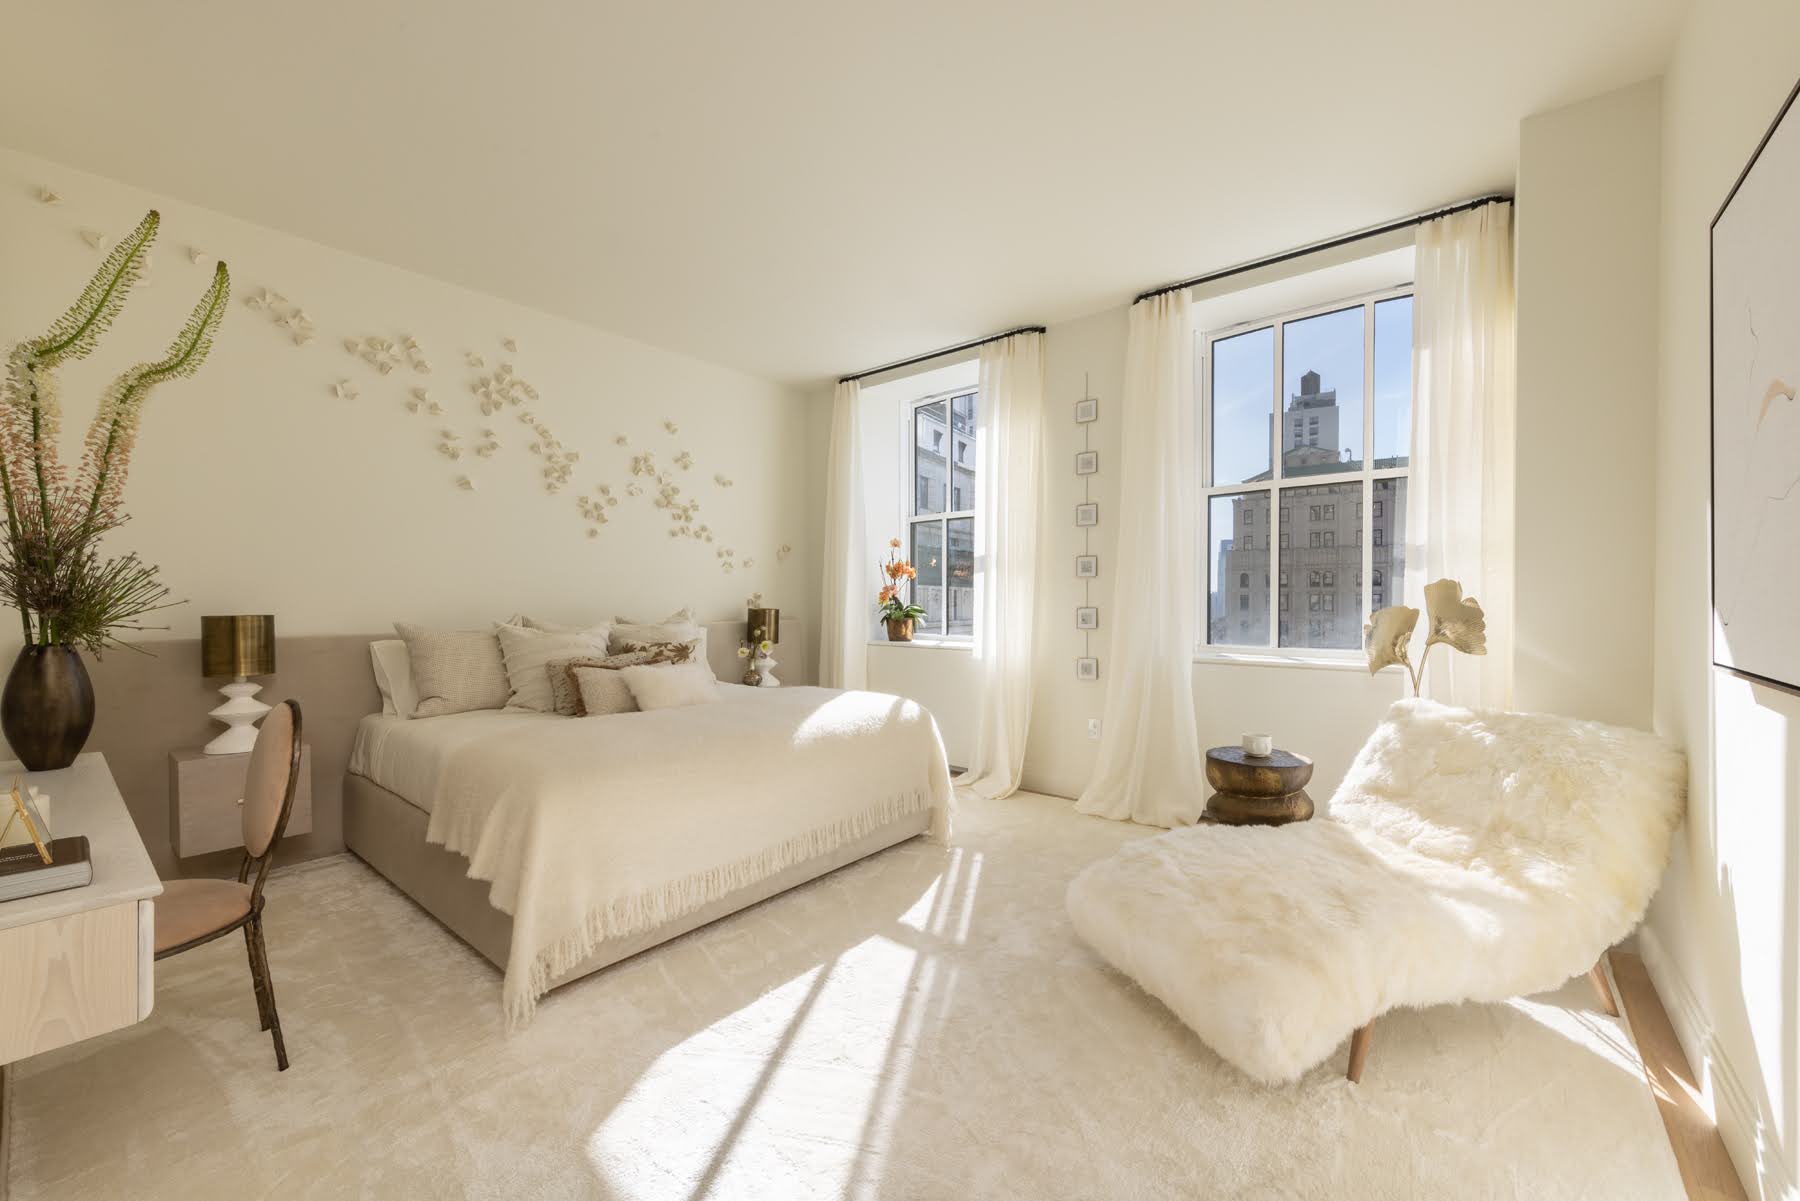 Model bedroom at One Wall Street, staged by Yellow House - Photo credit Evan Joseph for Macklowe Properties